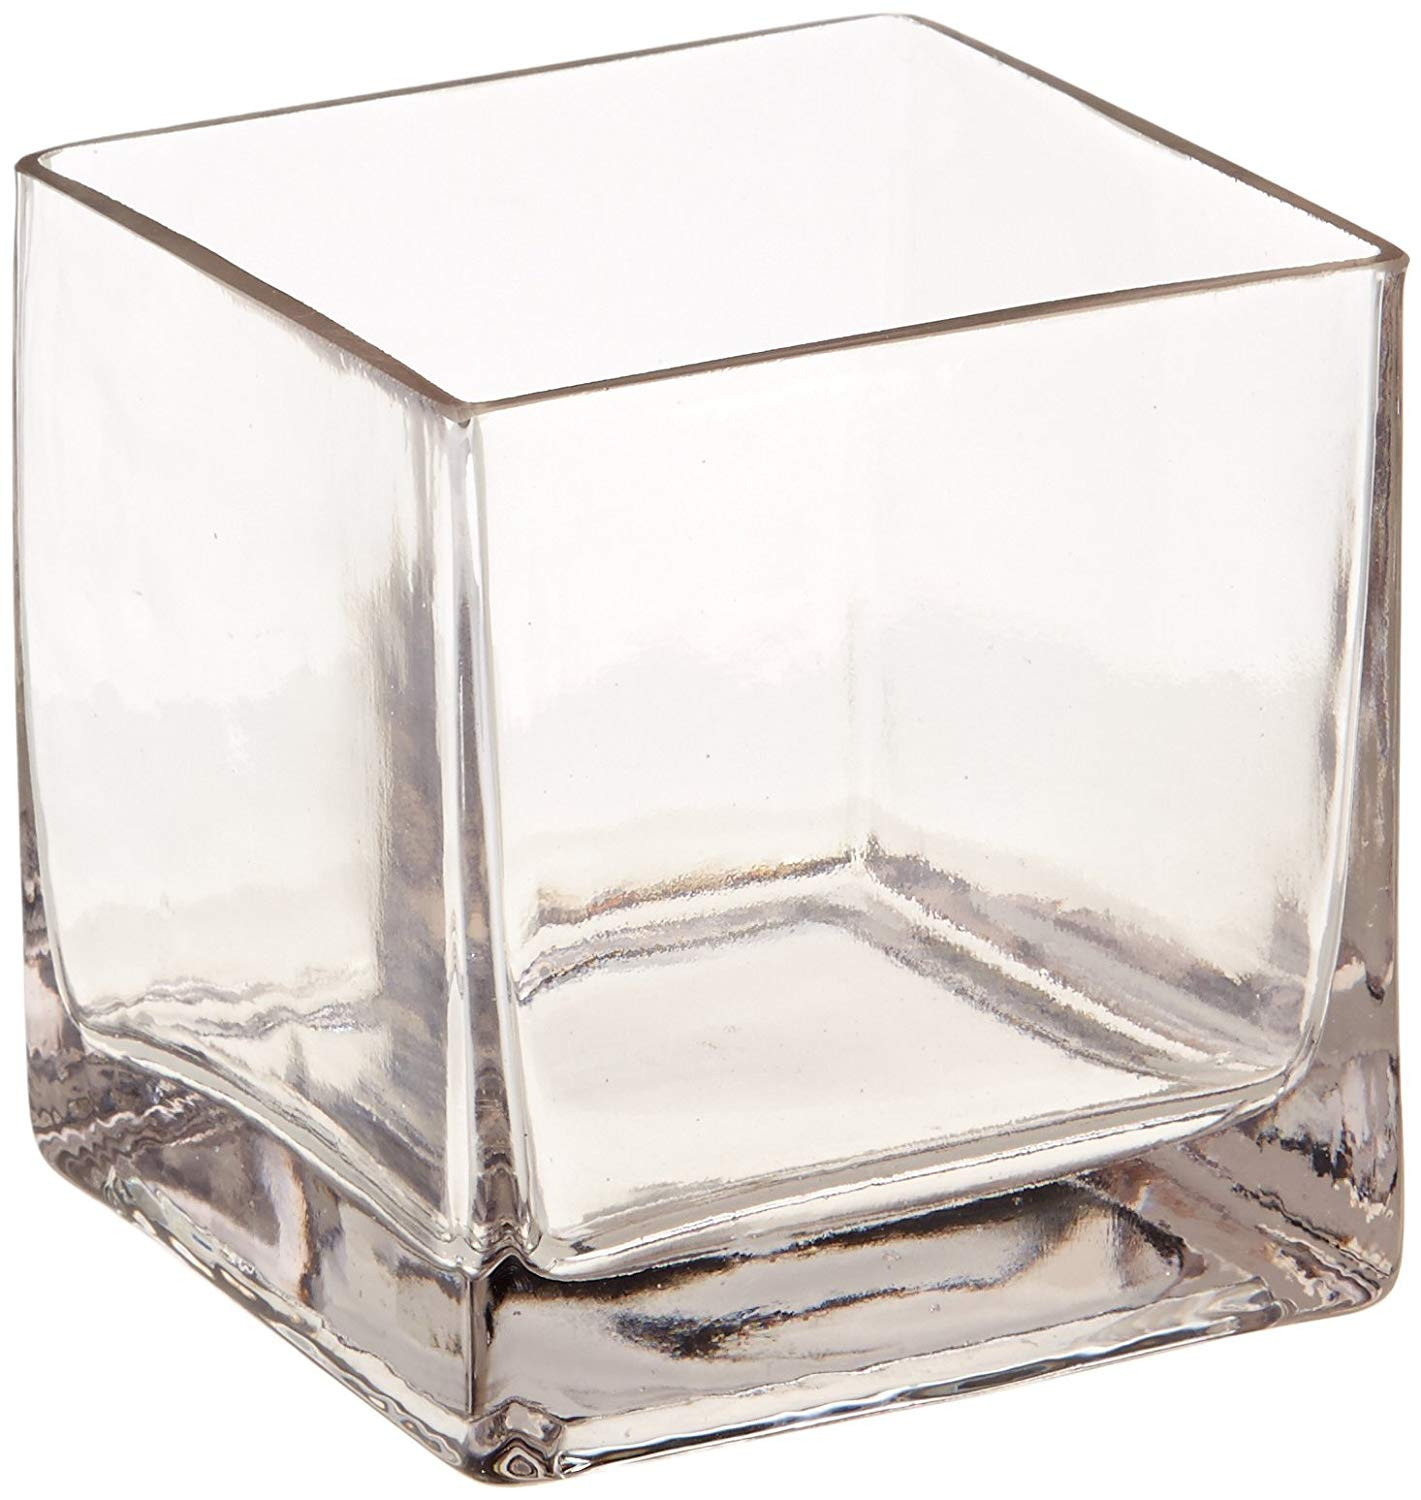 19 Stylish 3 Tiered Cylinder Vases 2024 free download 3 tiered cylinder vases of buy cys excel 12pc clear square glass vase cube 5 inch 5 x 5 x 5 within buy cys excel 12pc clear square glass vase cube 5 inch 5 x 5 x 5 twelve vases online at low